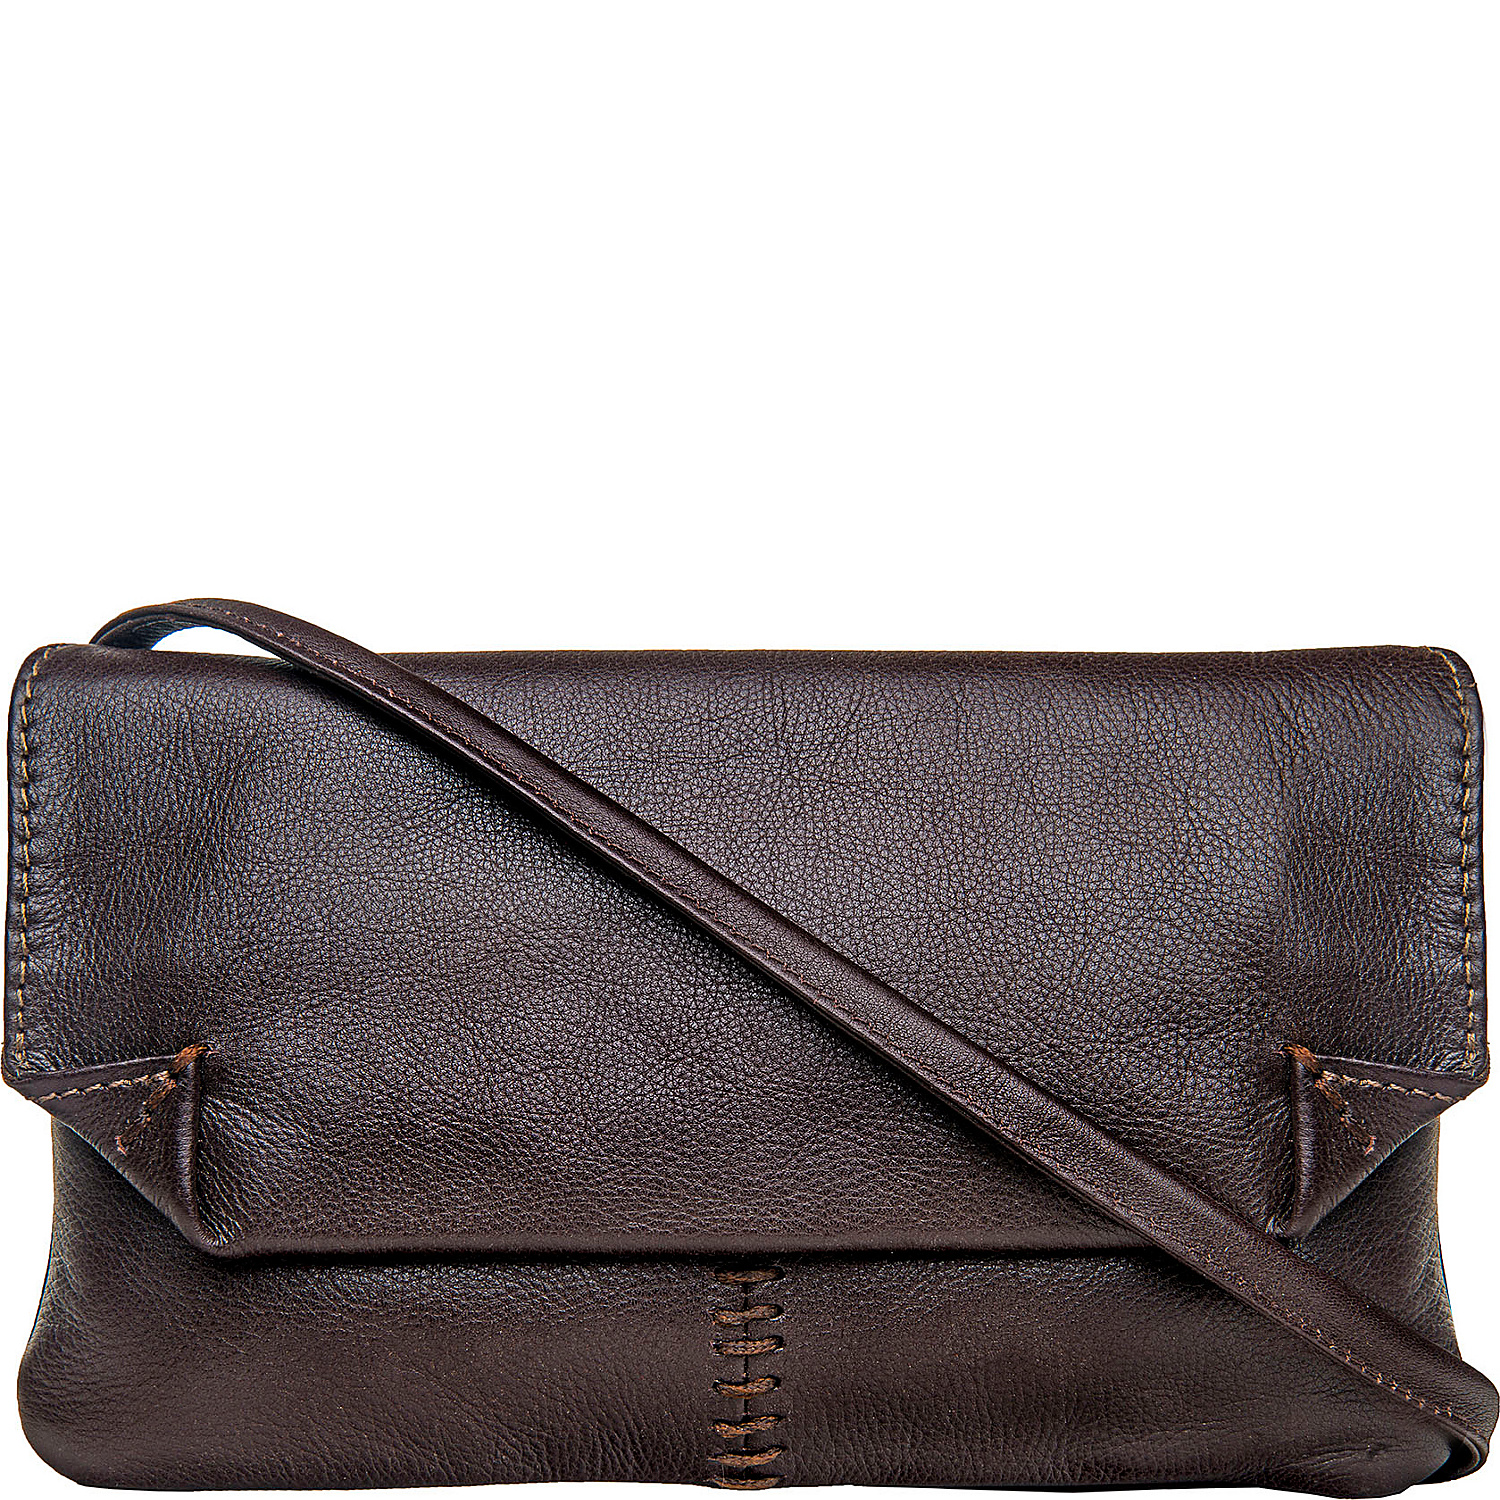 Stitch Leather Handcrafted Cross Body